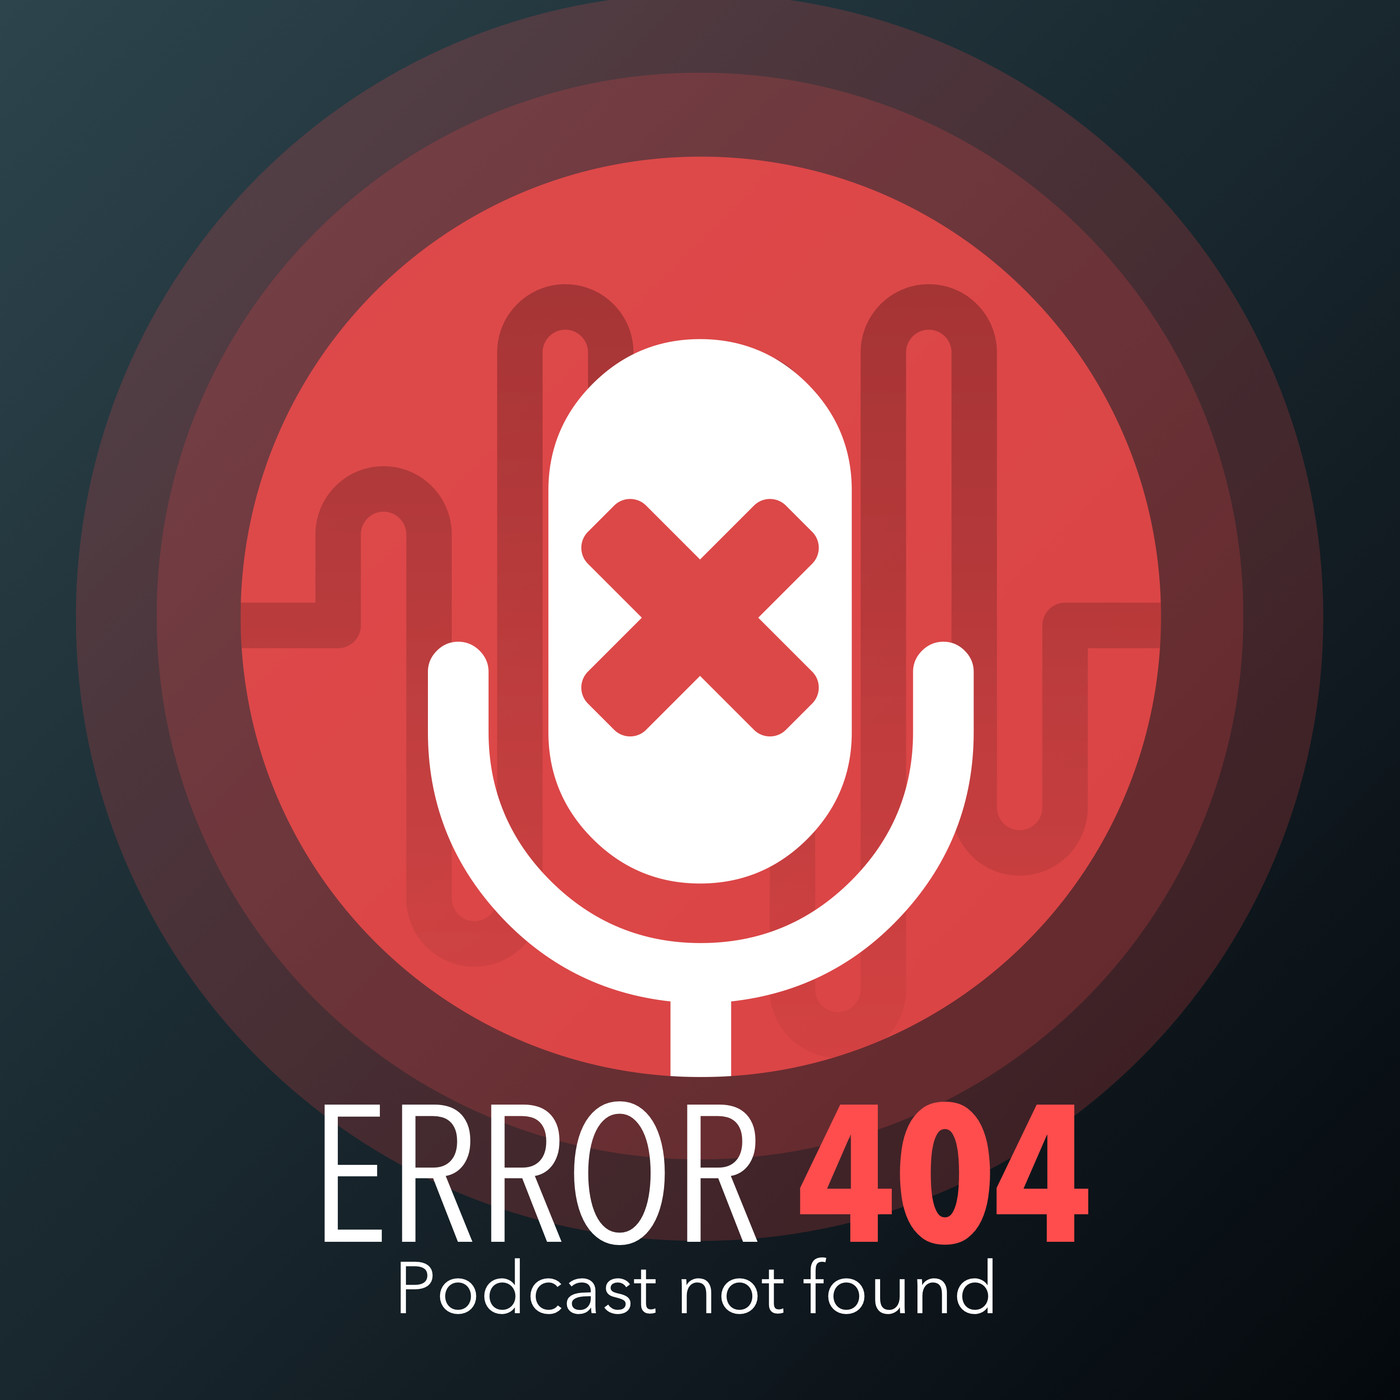 Podcast Not Found